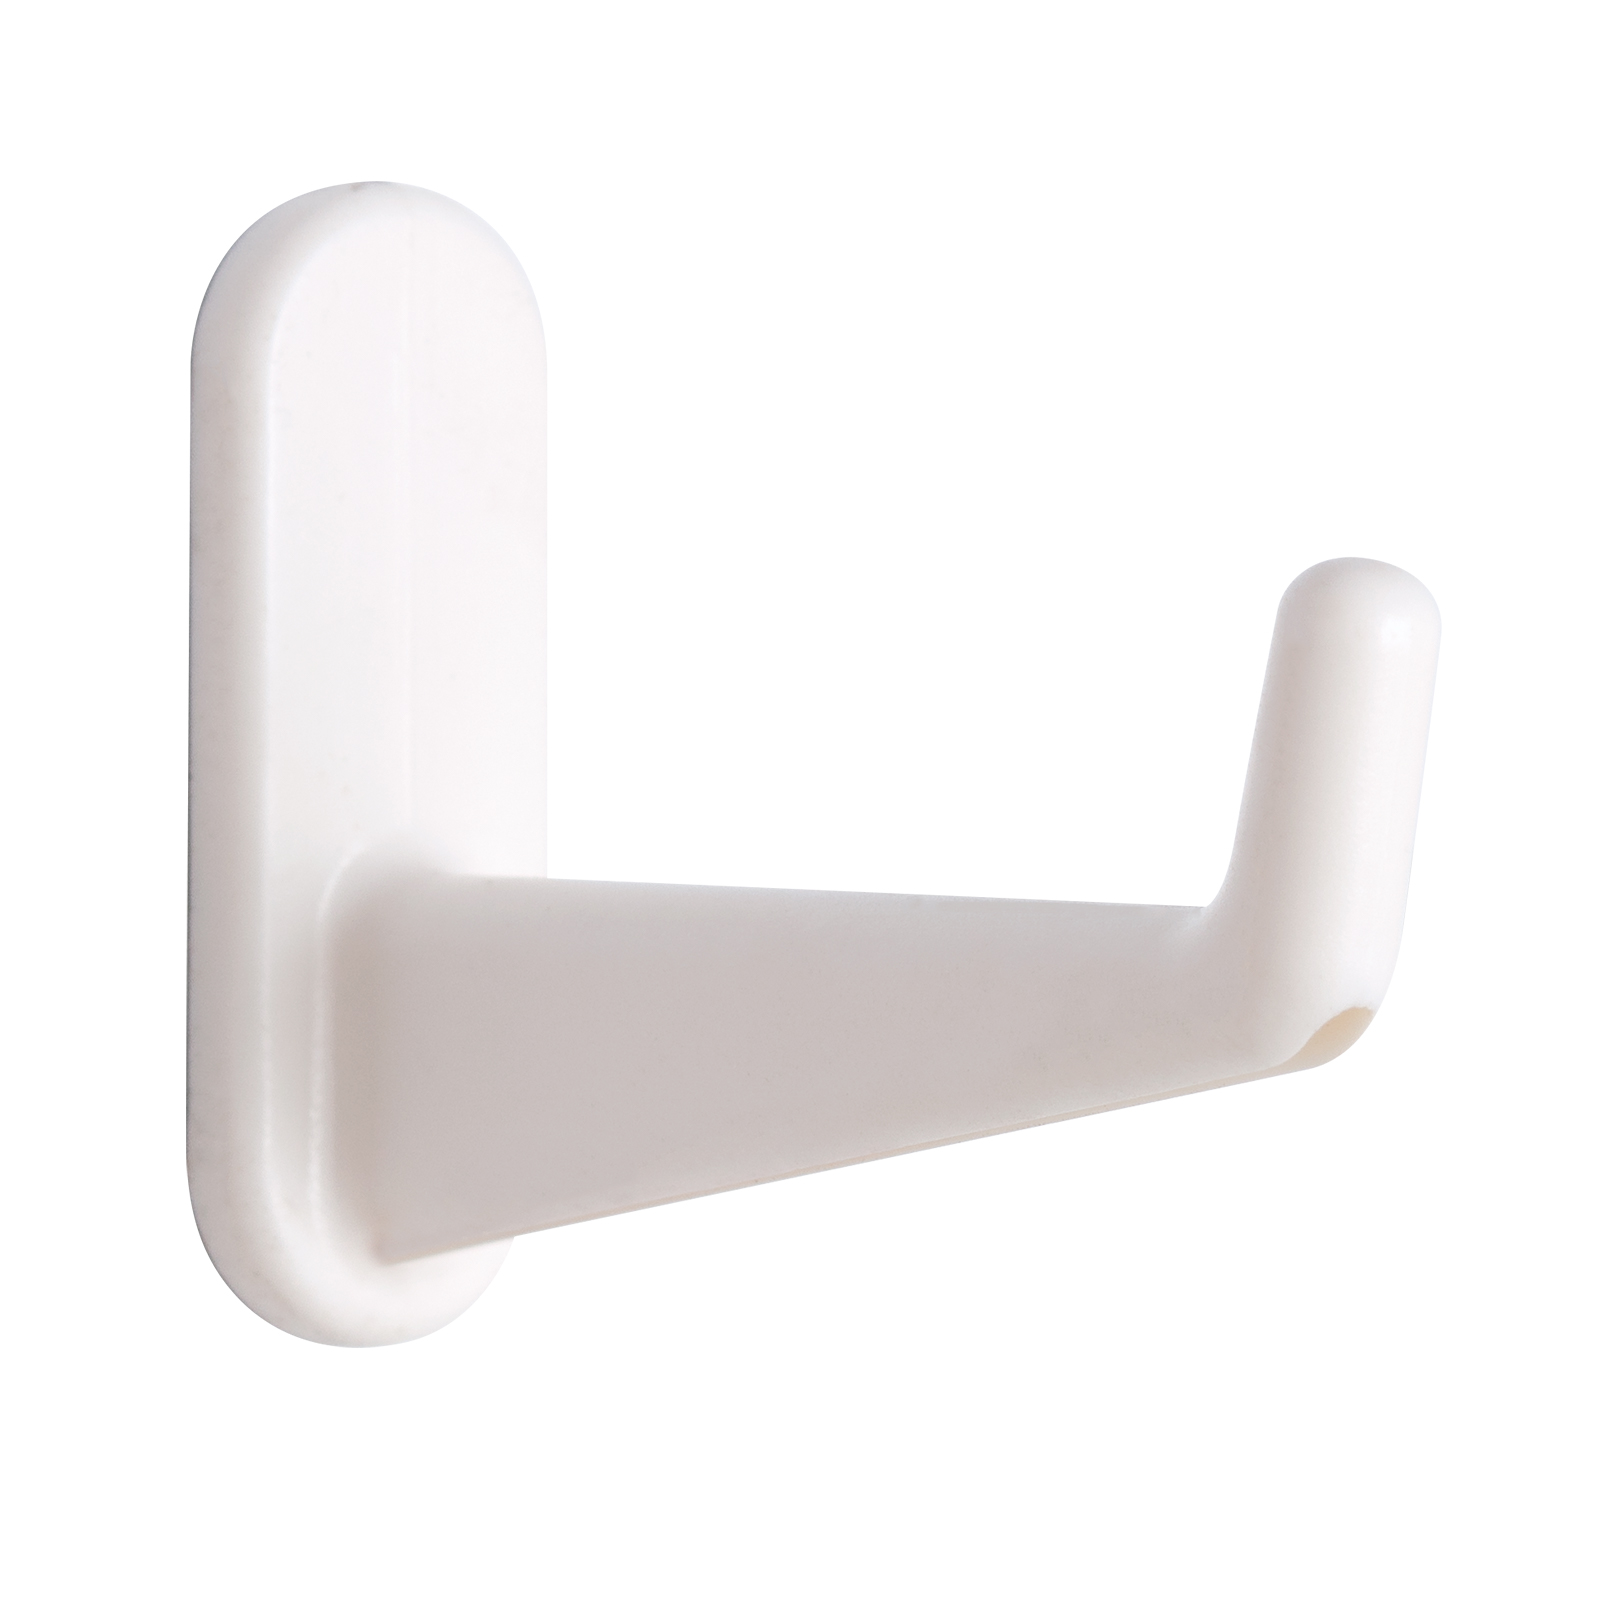 Home Solutions Pegboard Hooks Large White 4PK